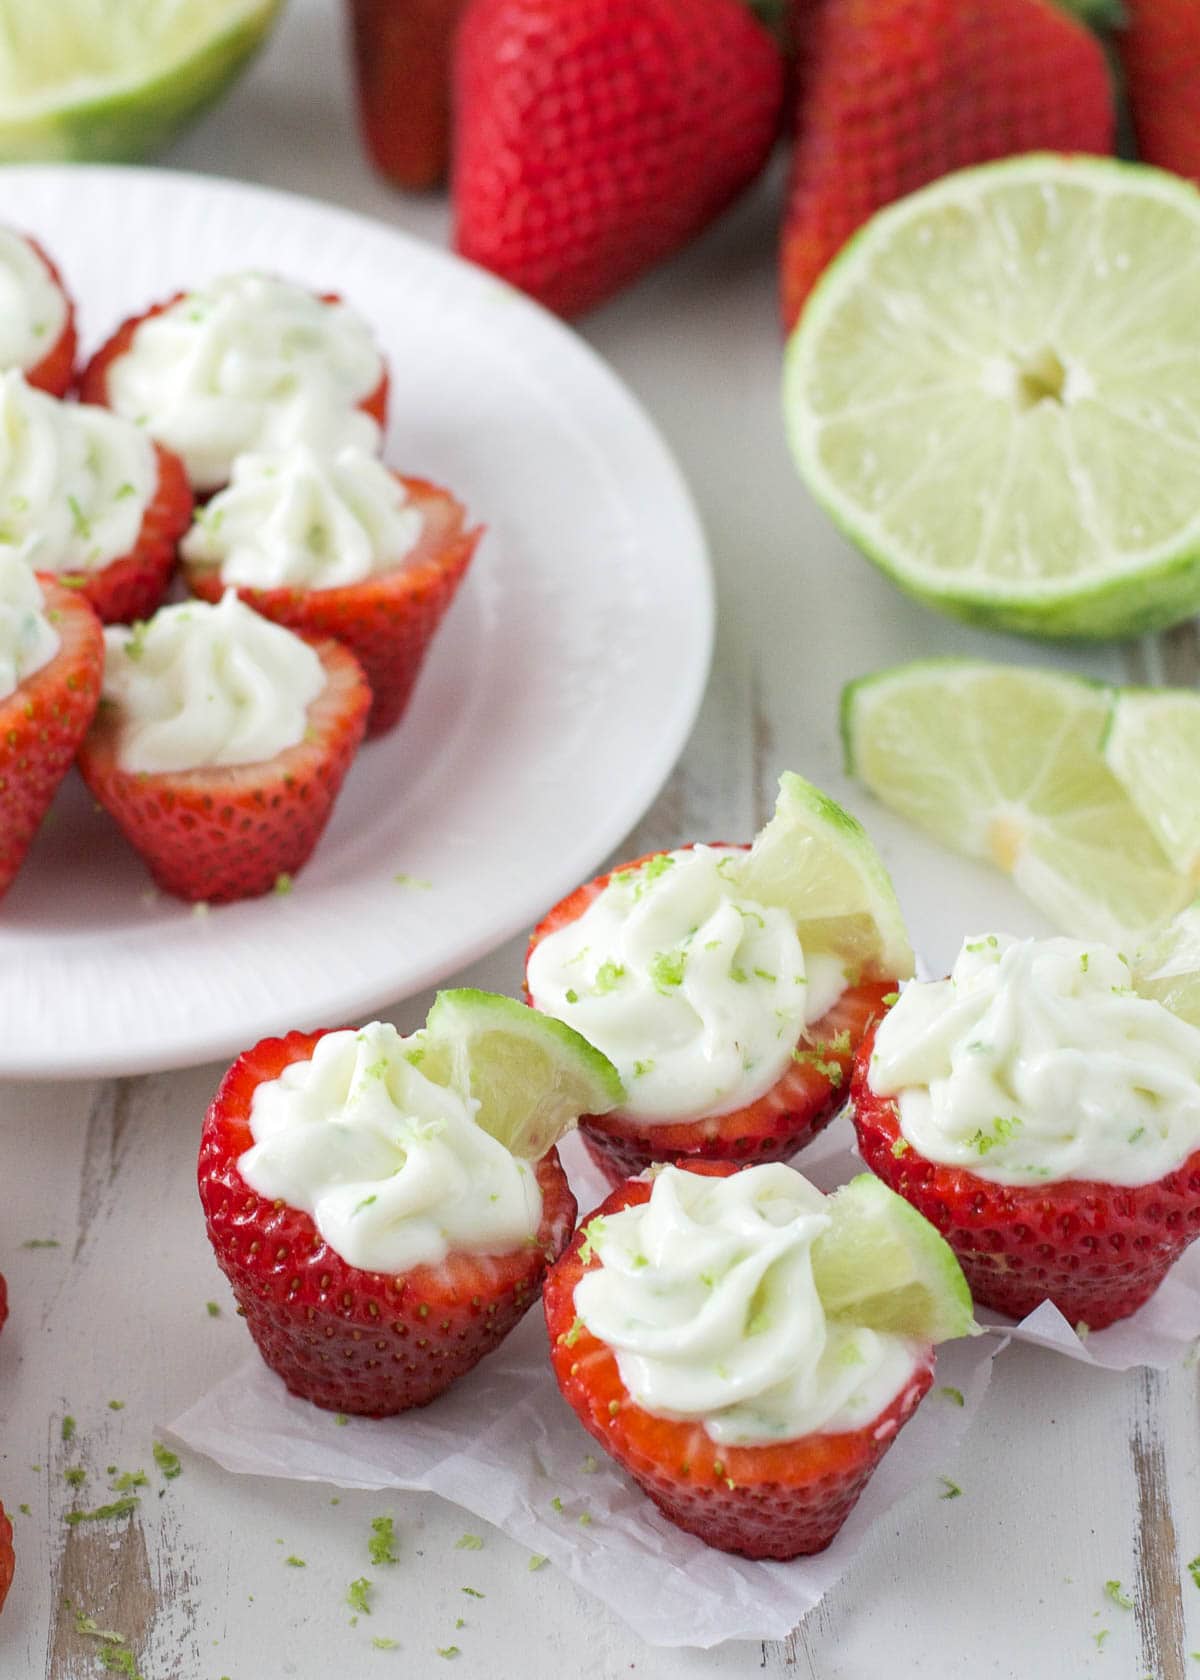 stuffed strawberries with lime cheesecake filling